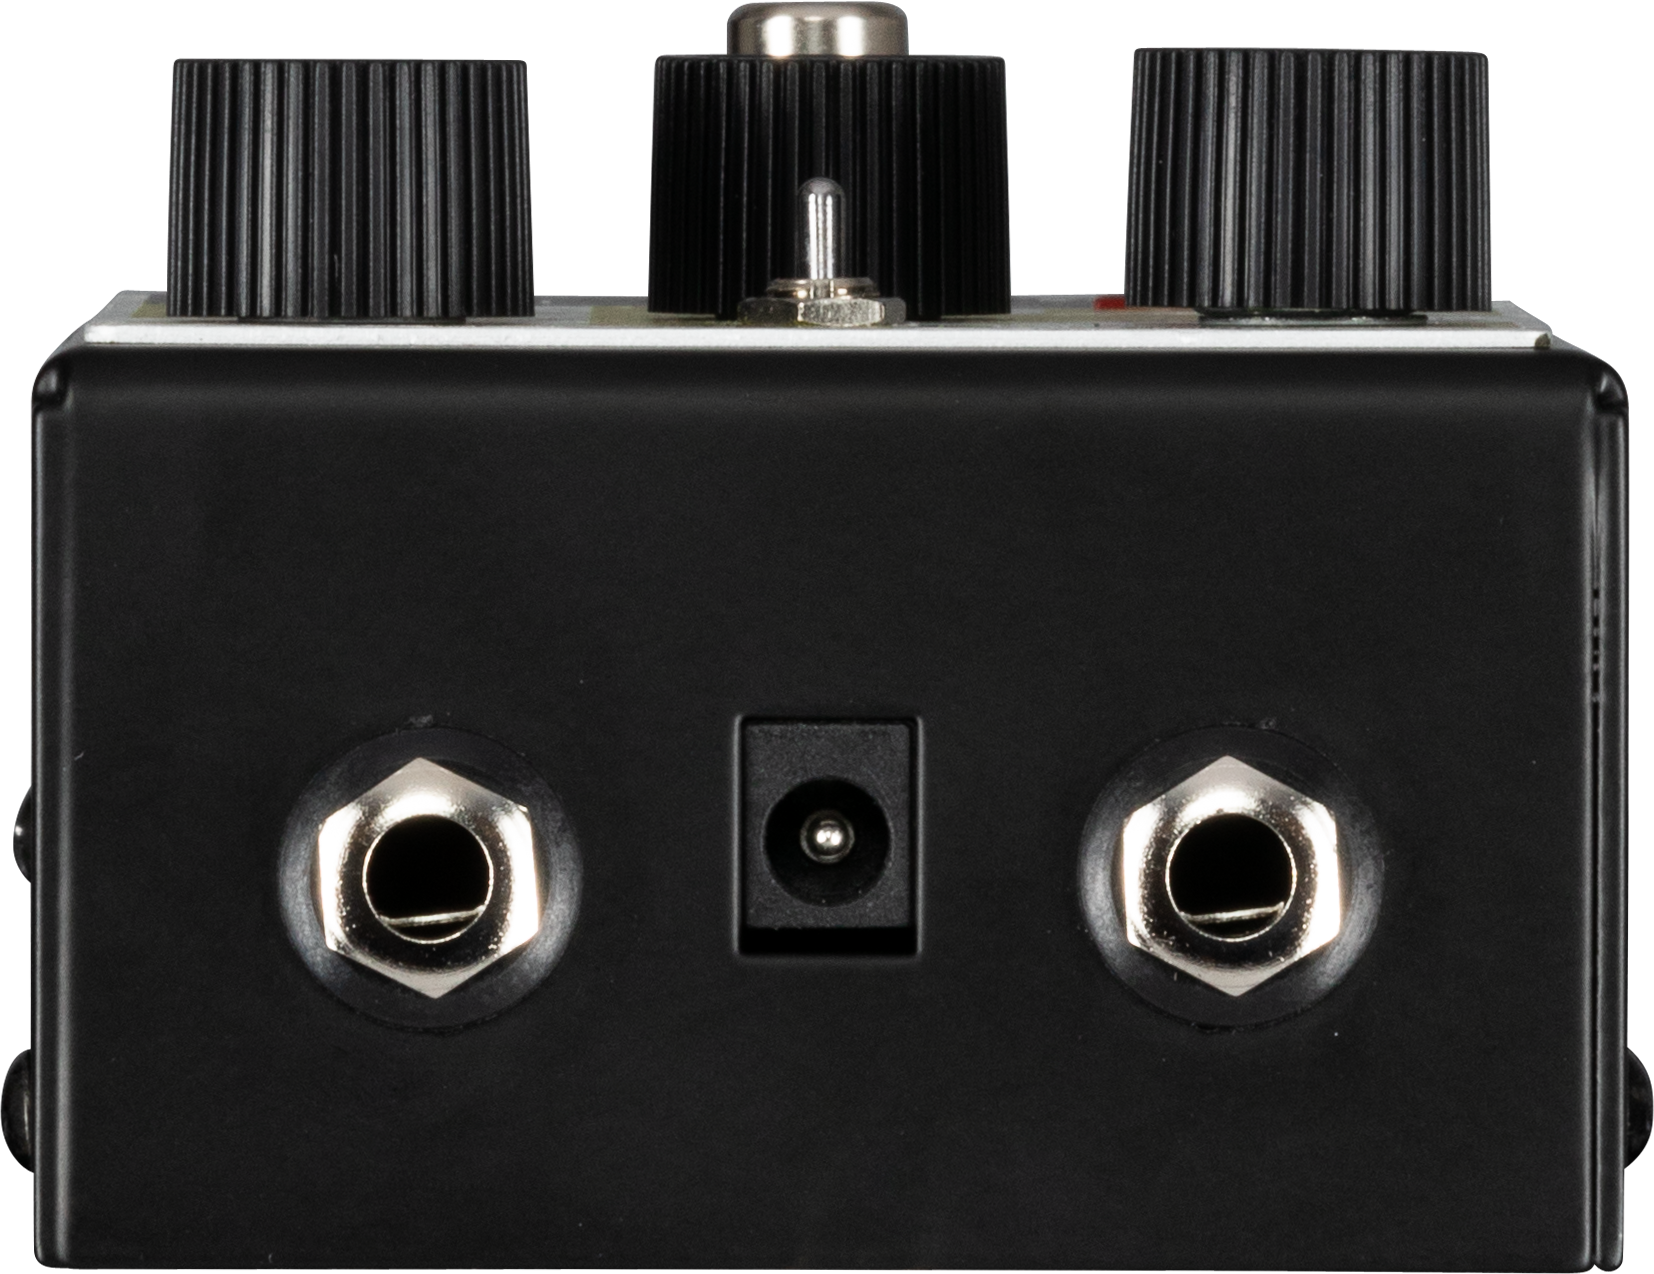 Fuzz pedal with toggle switch for classic och modern